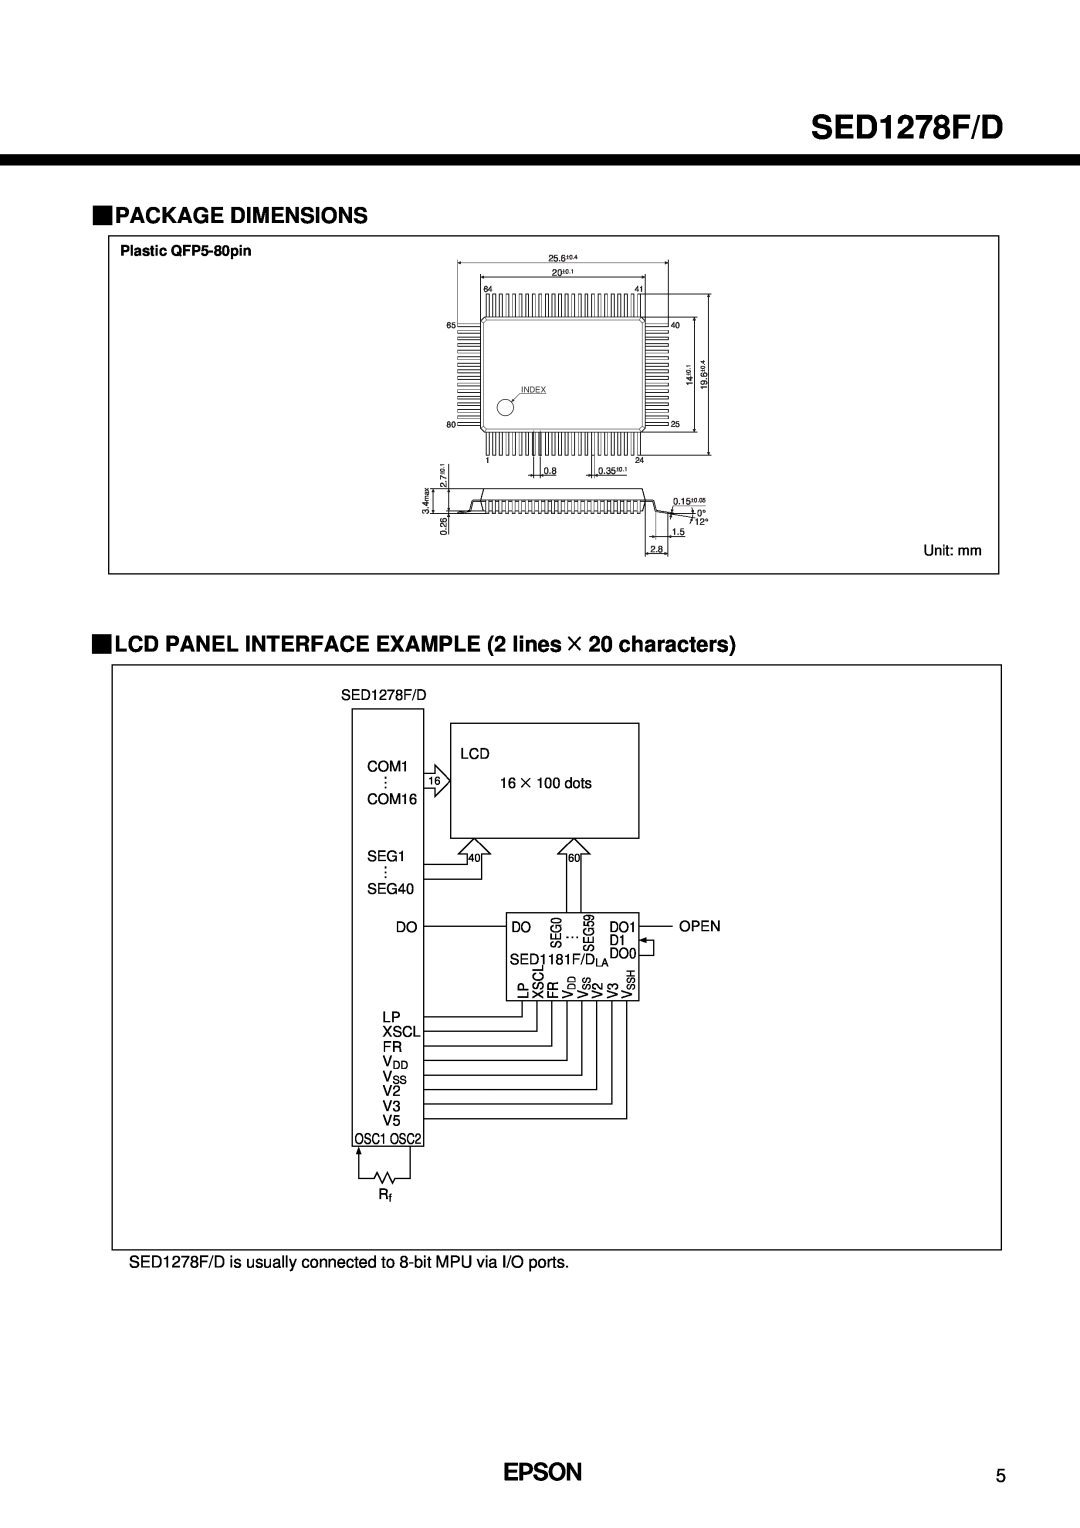 Epson SED1278F/D manual Package Dimensions, LCD PANEL INTERFACE EXAMPLE 2 lines, characters, Plastic QFP5-80pin 